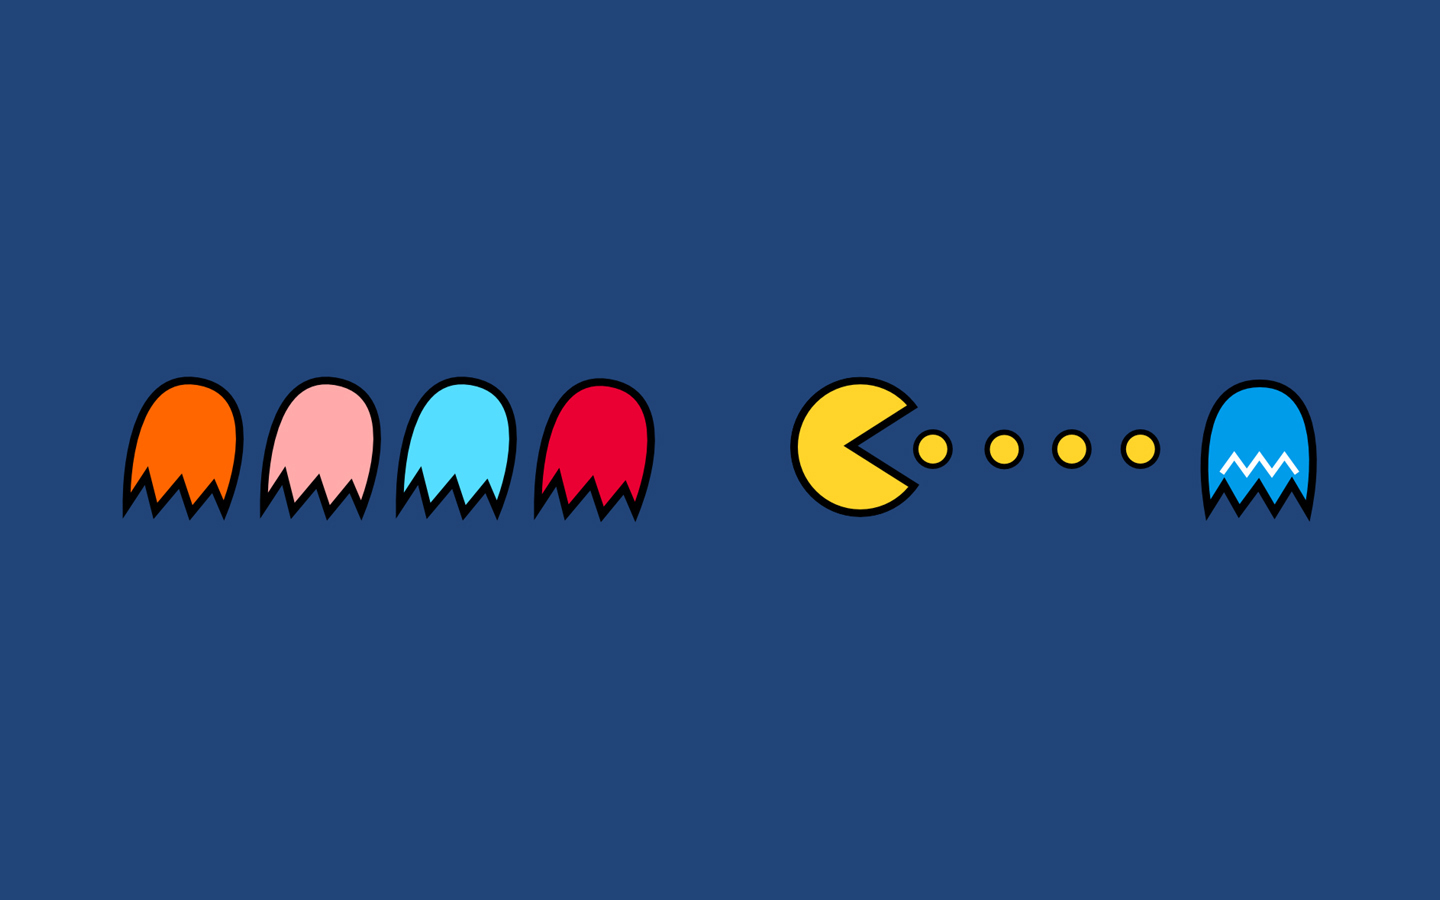 Pac Man Images Icons Wallpapers And Photos On Fanpop HD Wallpapers Download Free Images Wallpaper [wallpaper981.blogspot.com]